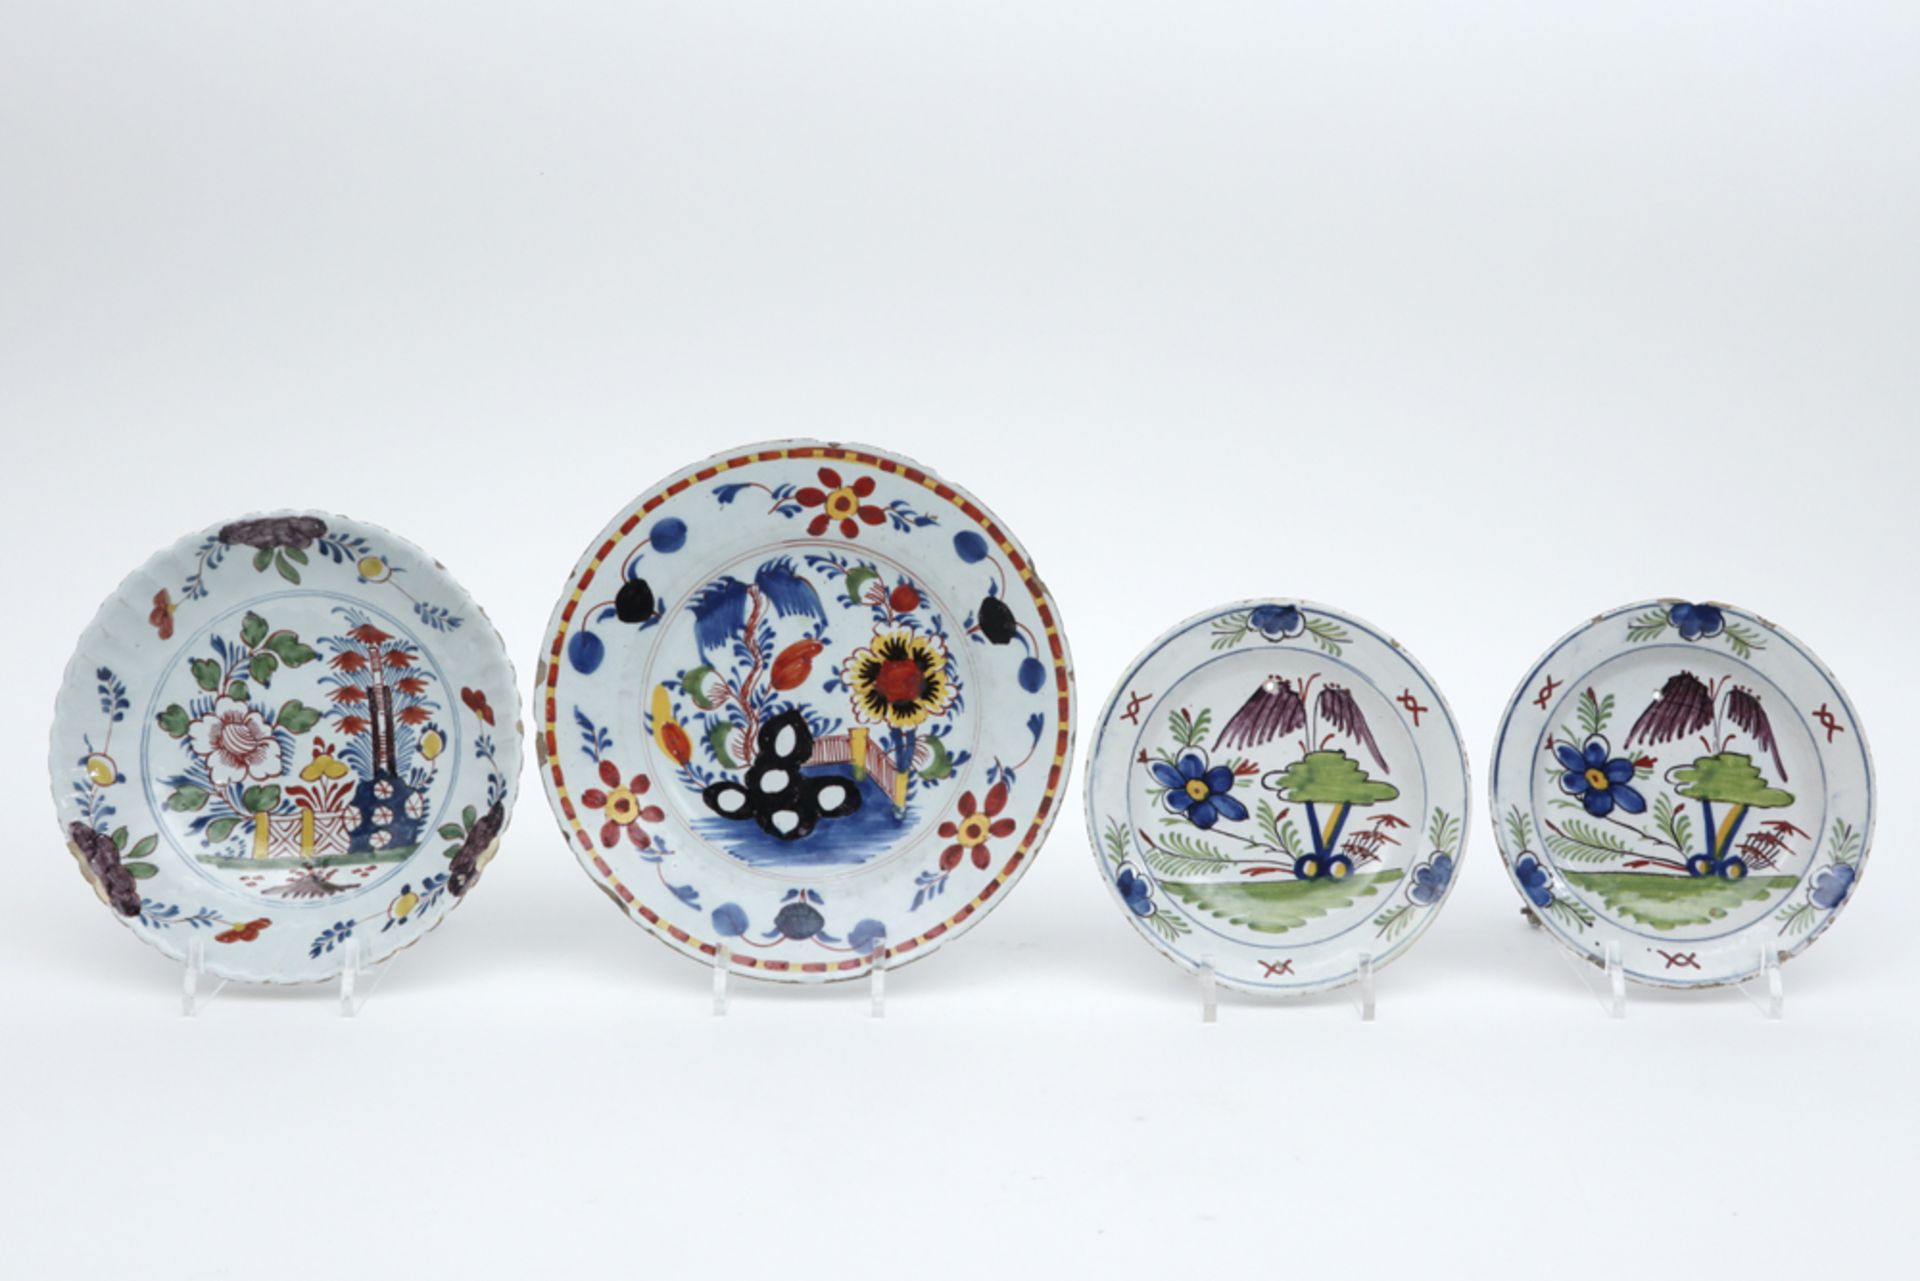 four pieces of 18th Cent. ceramic from Delft with polychrome decor || Lot (4) achttiende eeuwse